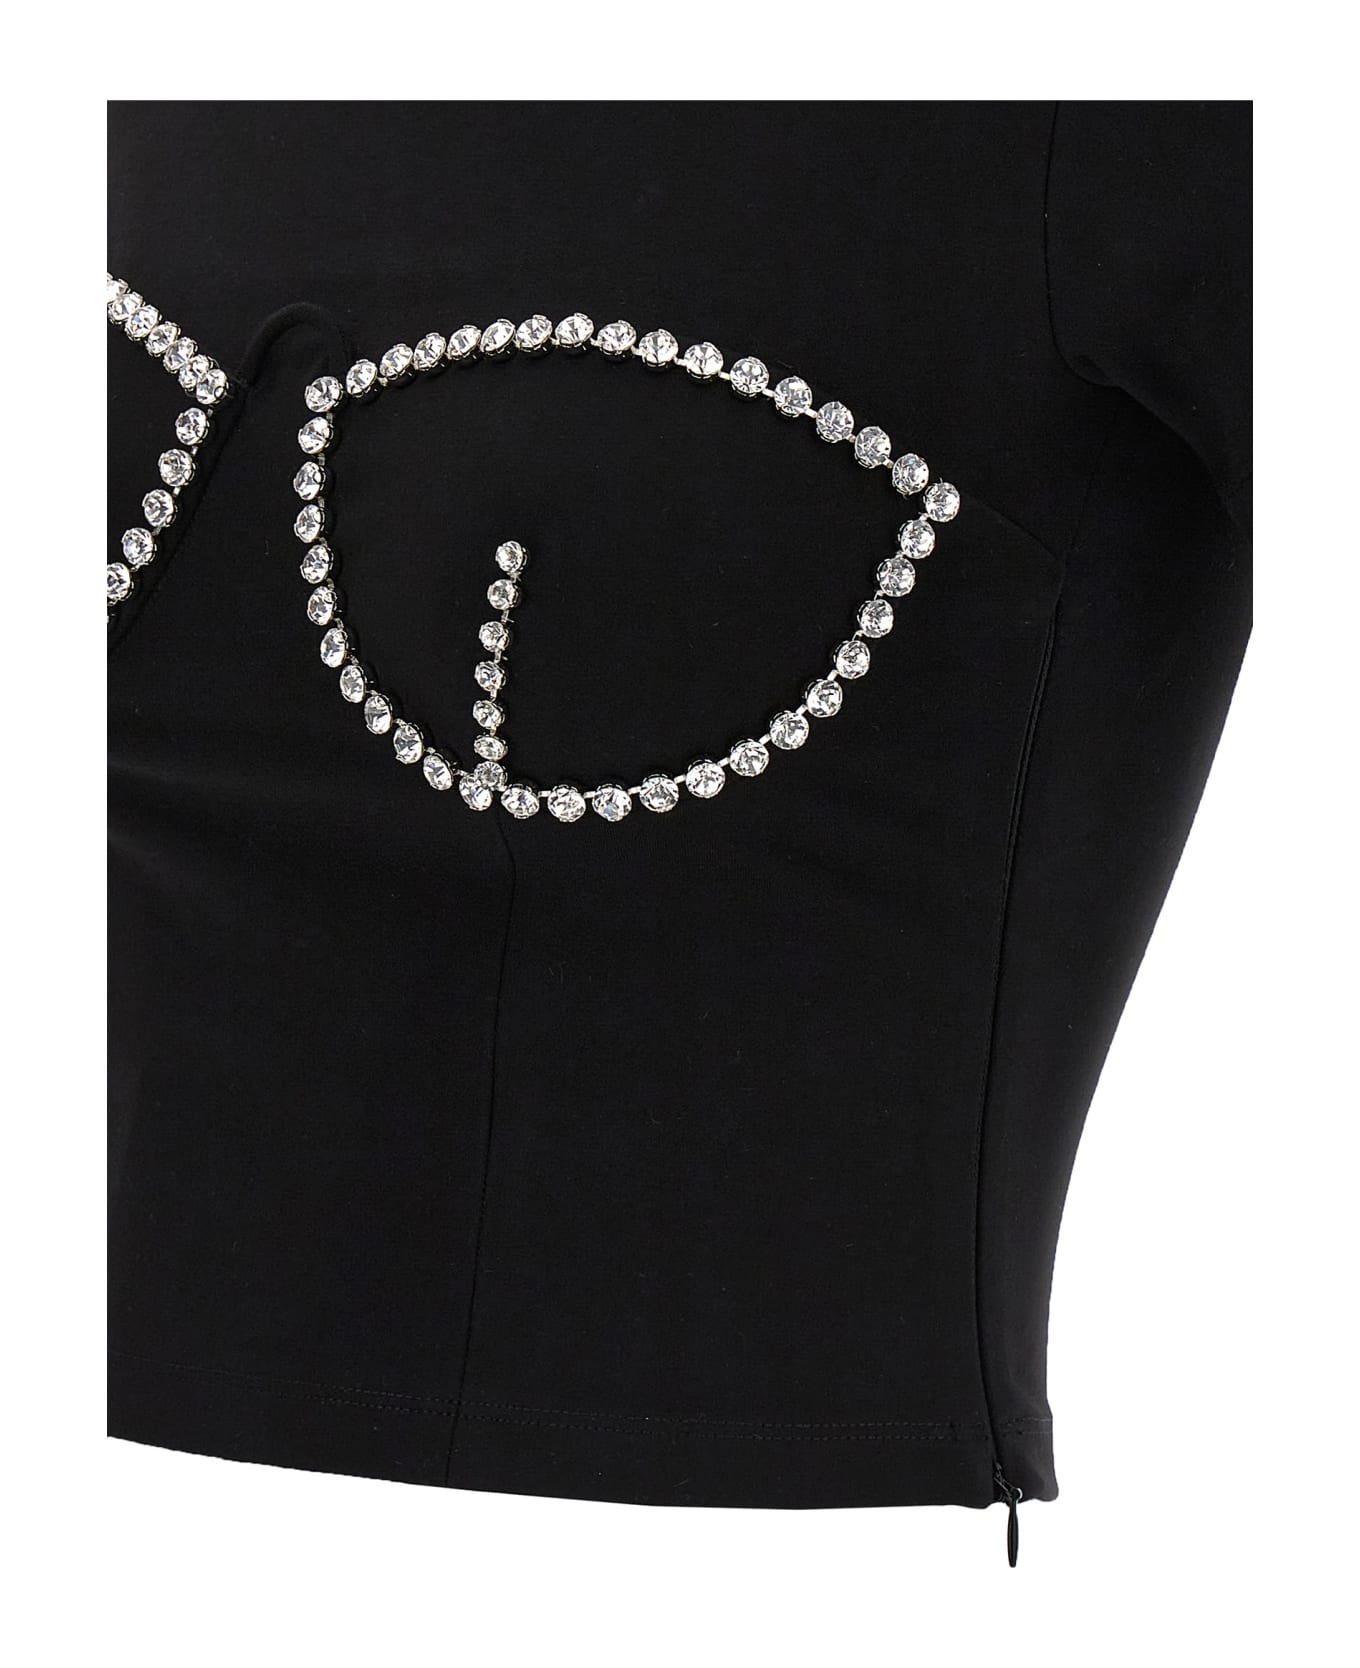 AREA T-shirt 'crystal Bustier Cup' - Black  